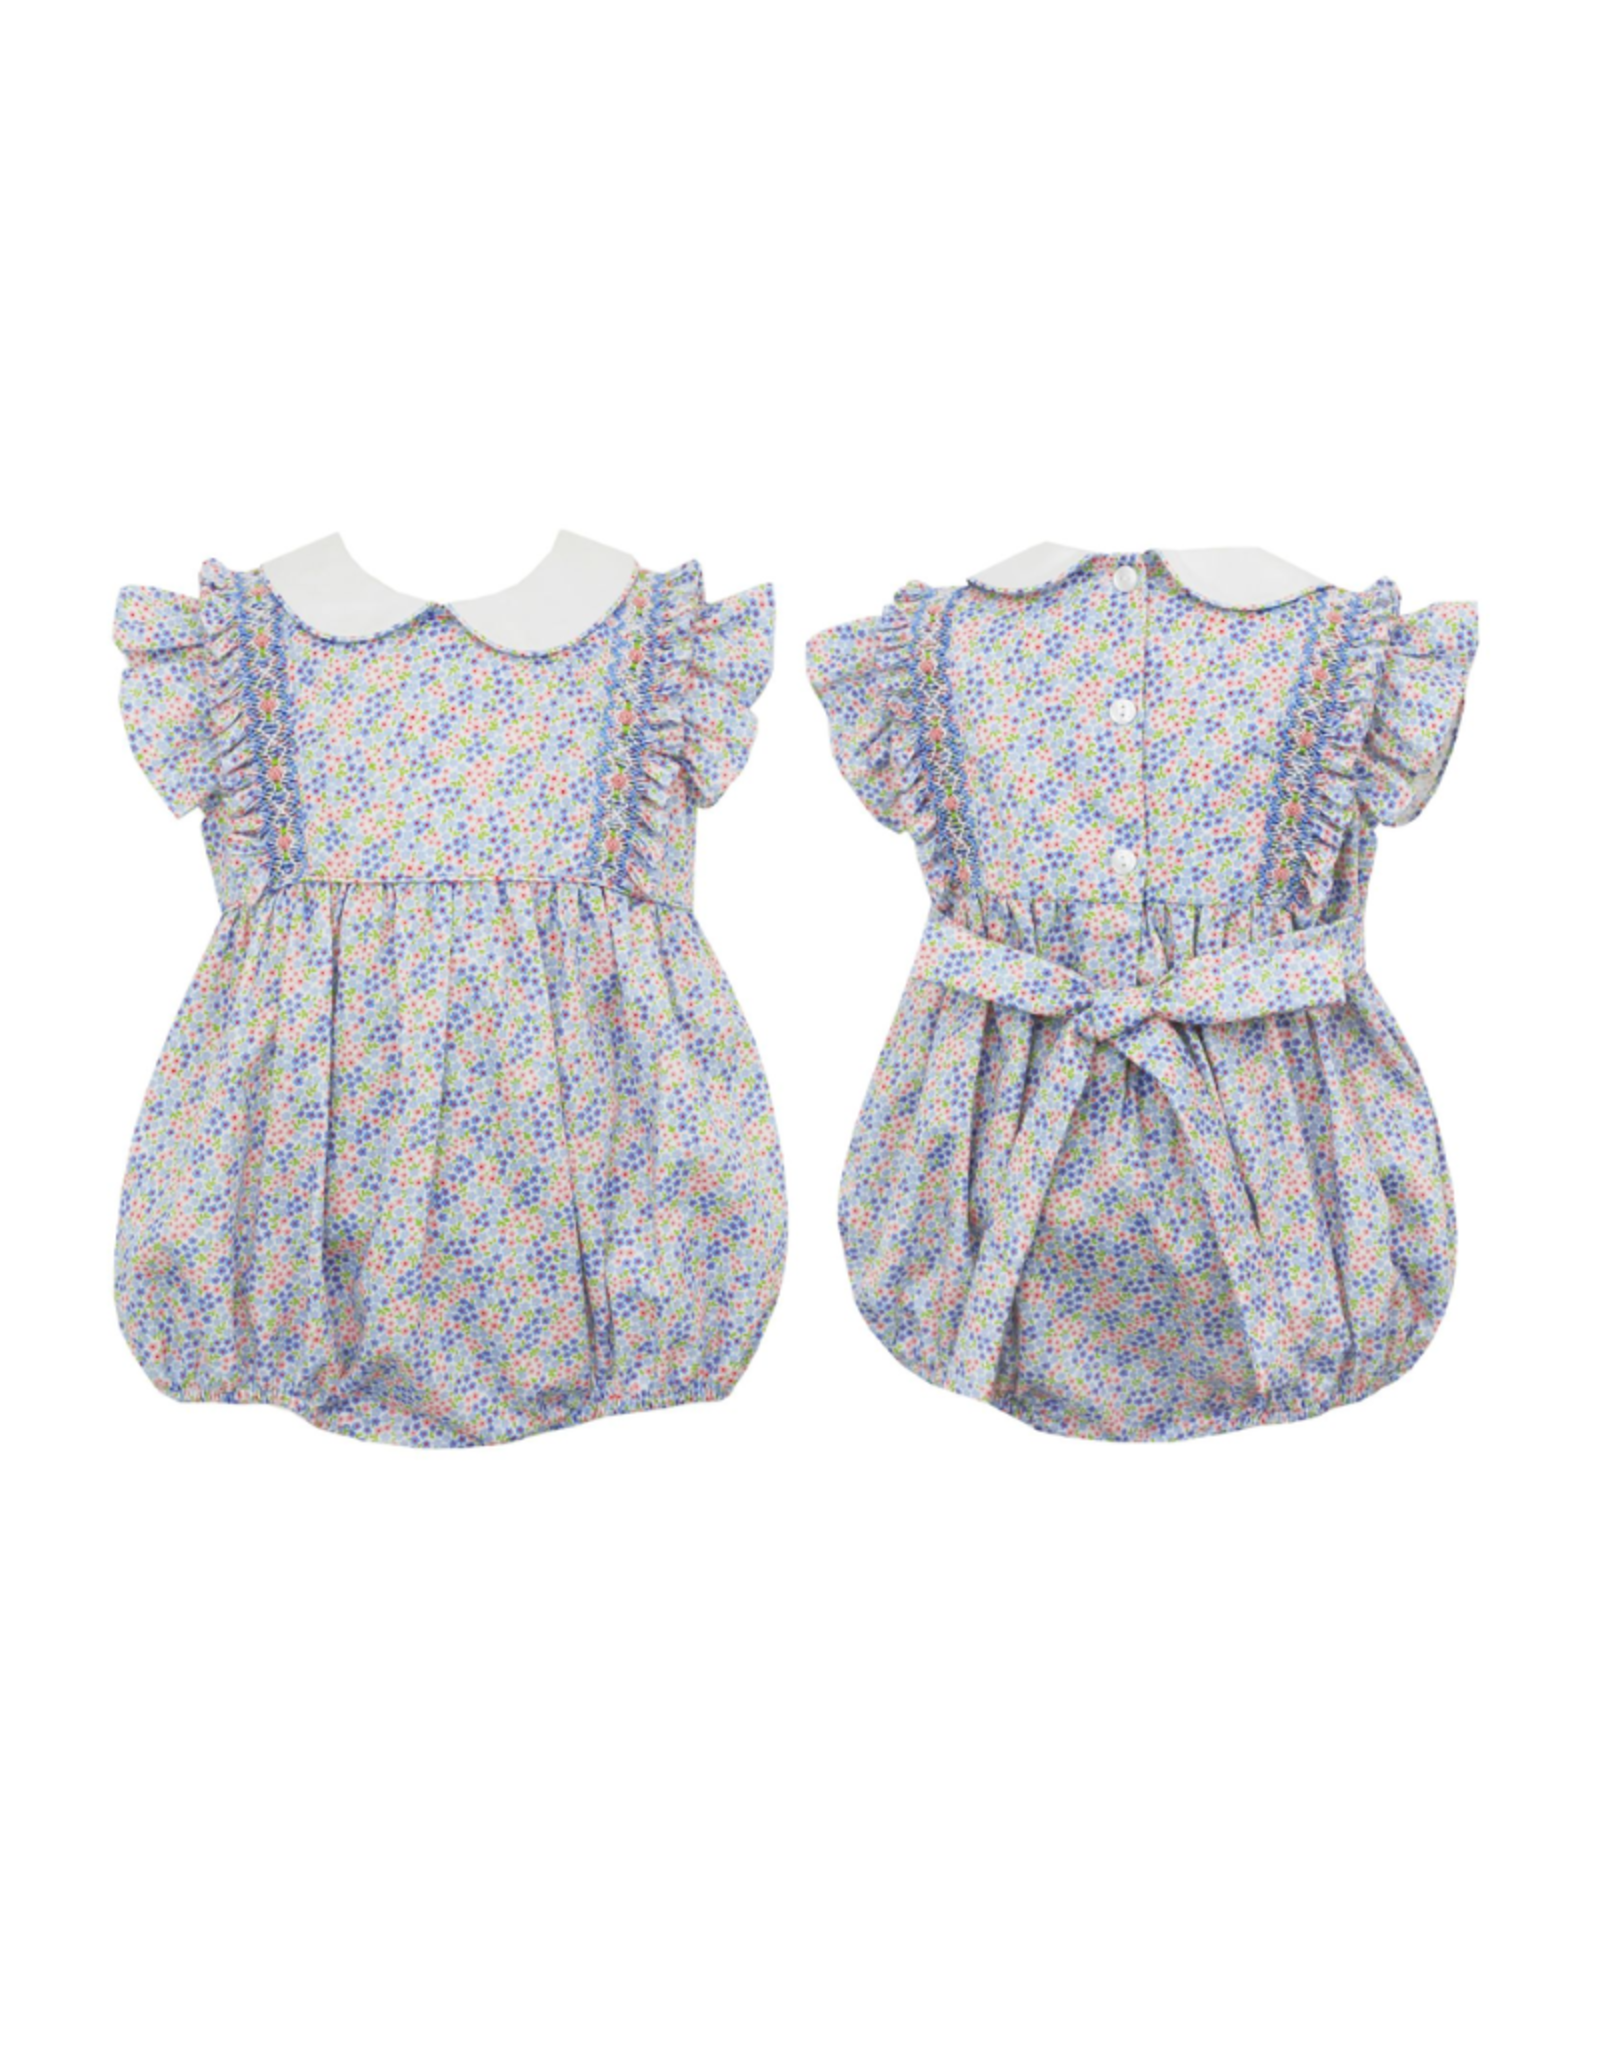 Claire and Charlie Pink/Blue Liberty Bubble W/Smocking